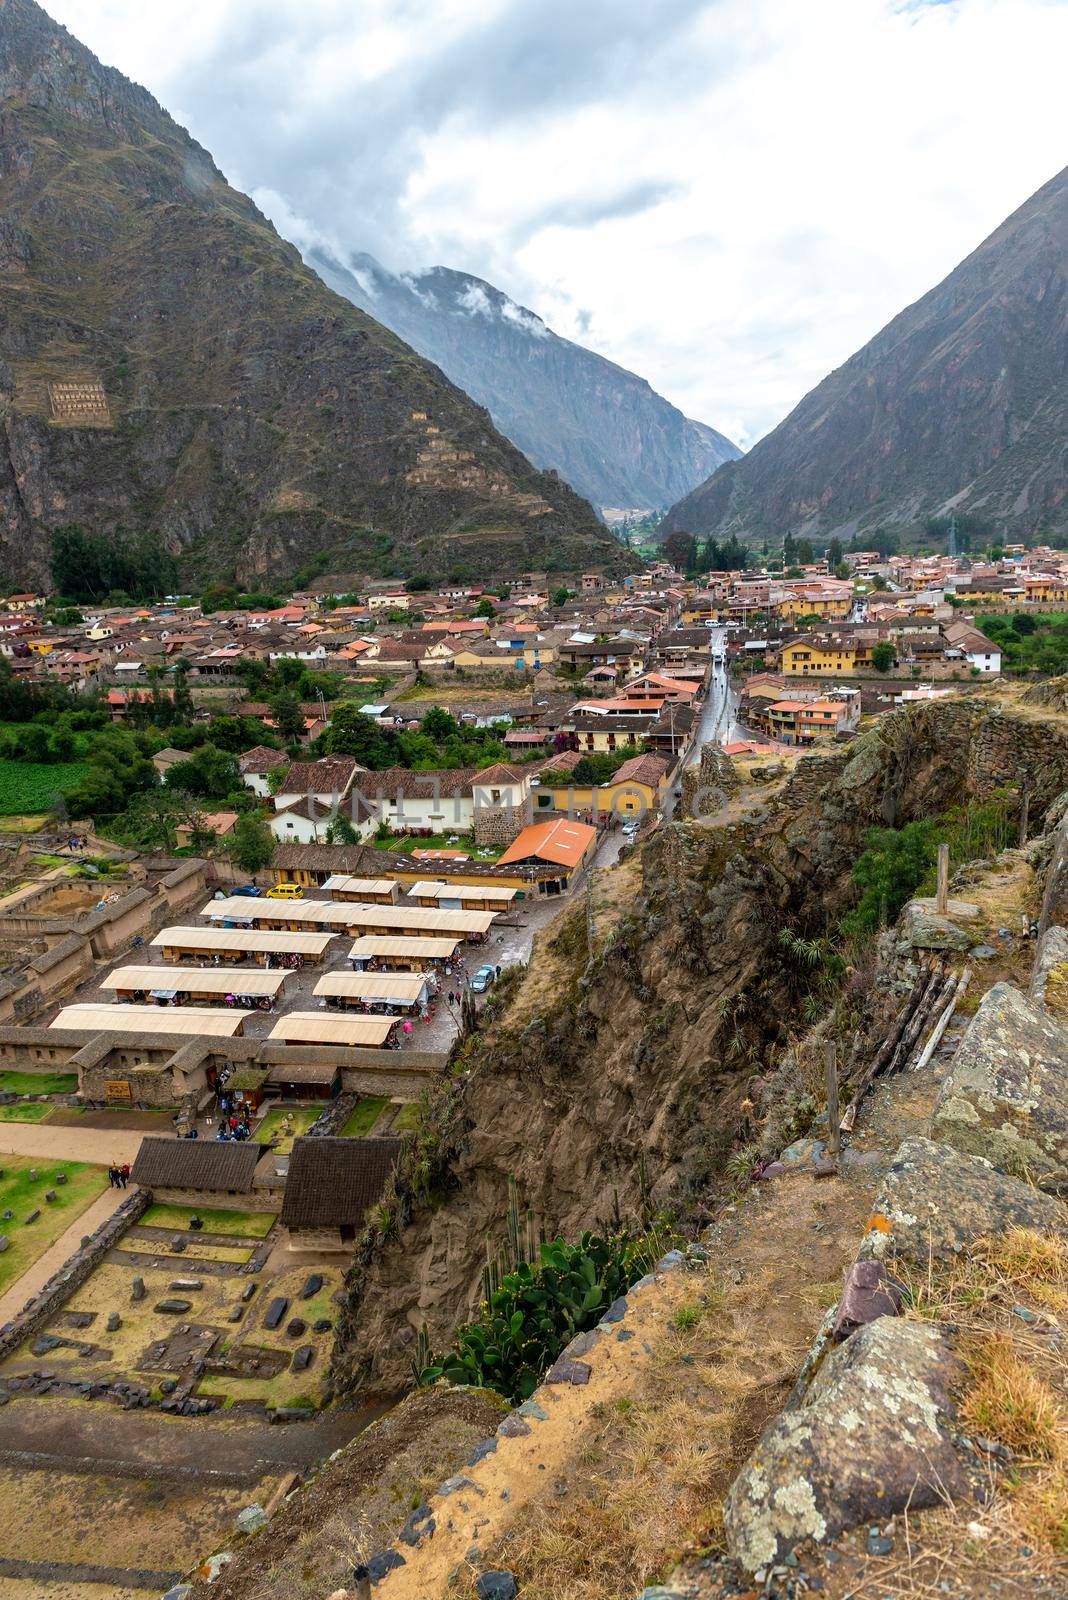 The village of Ollantaytambo down of ruined fort, near to the city of Cusco, Peru